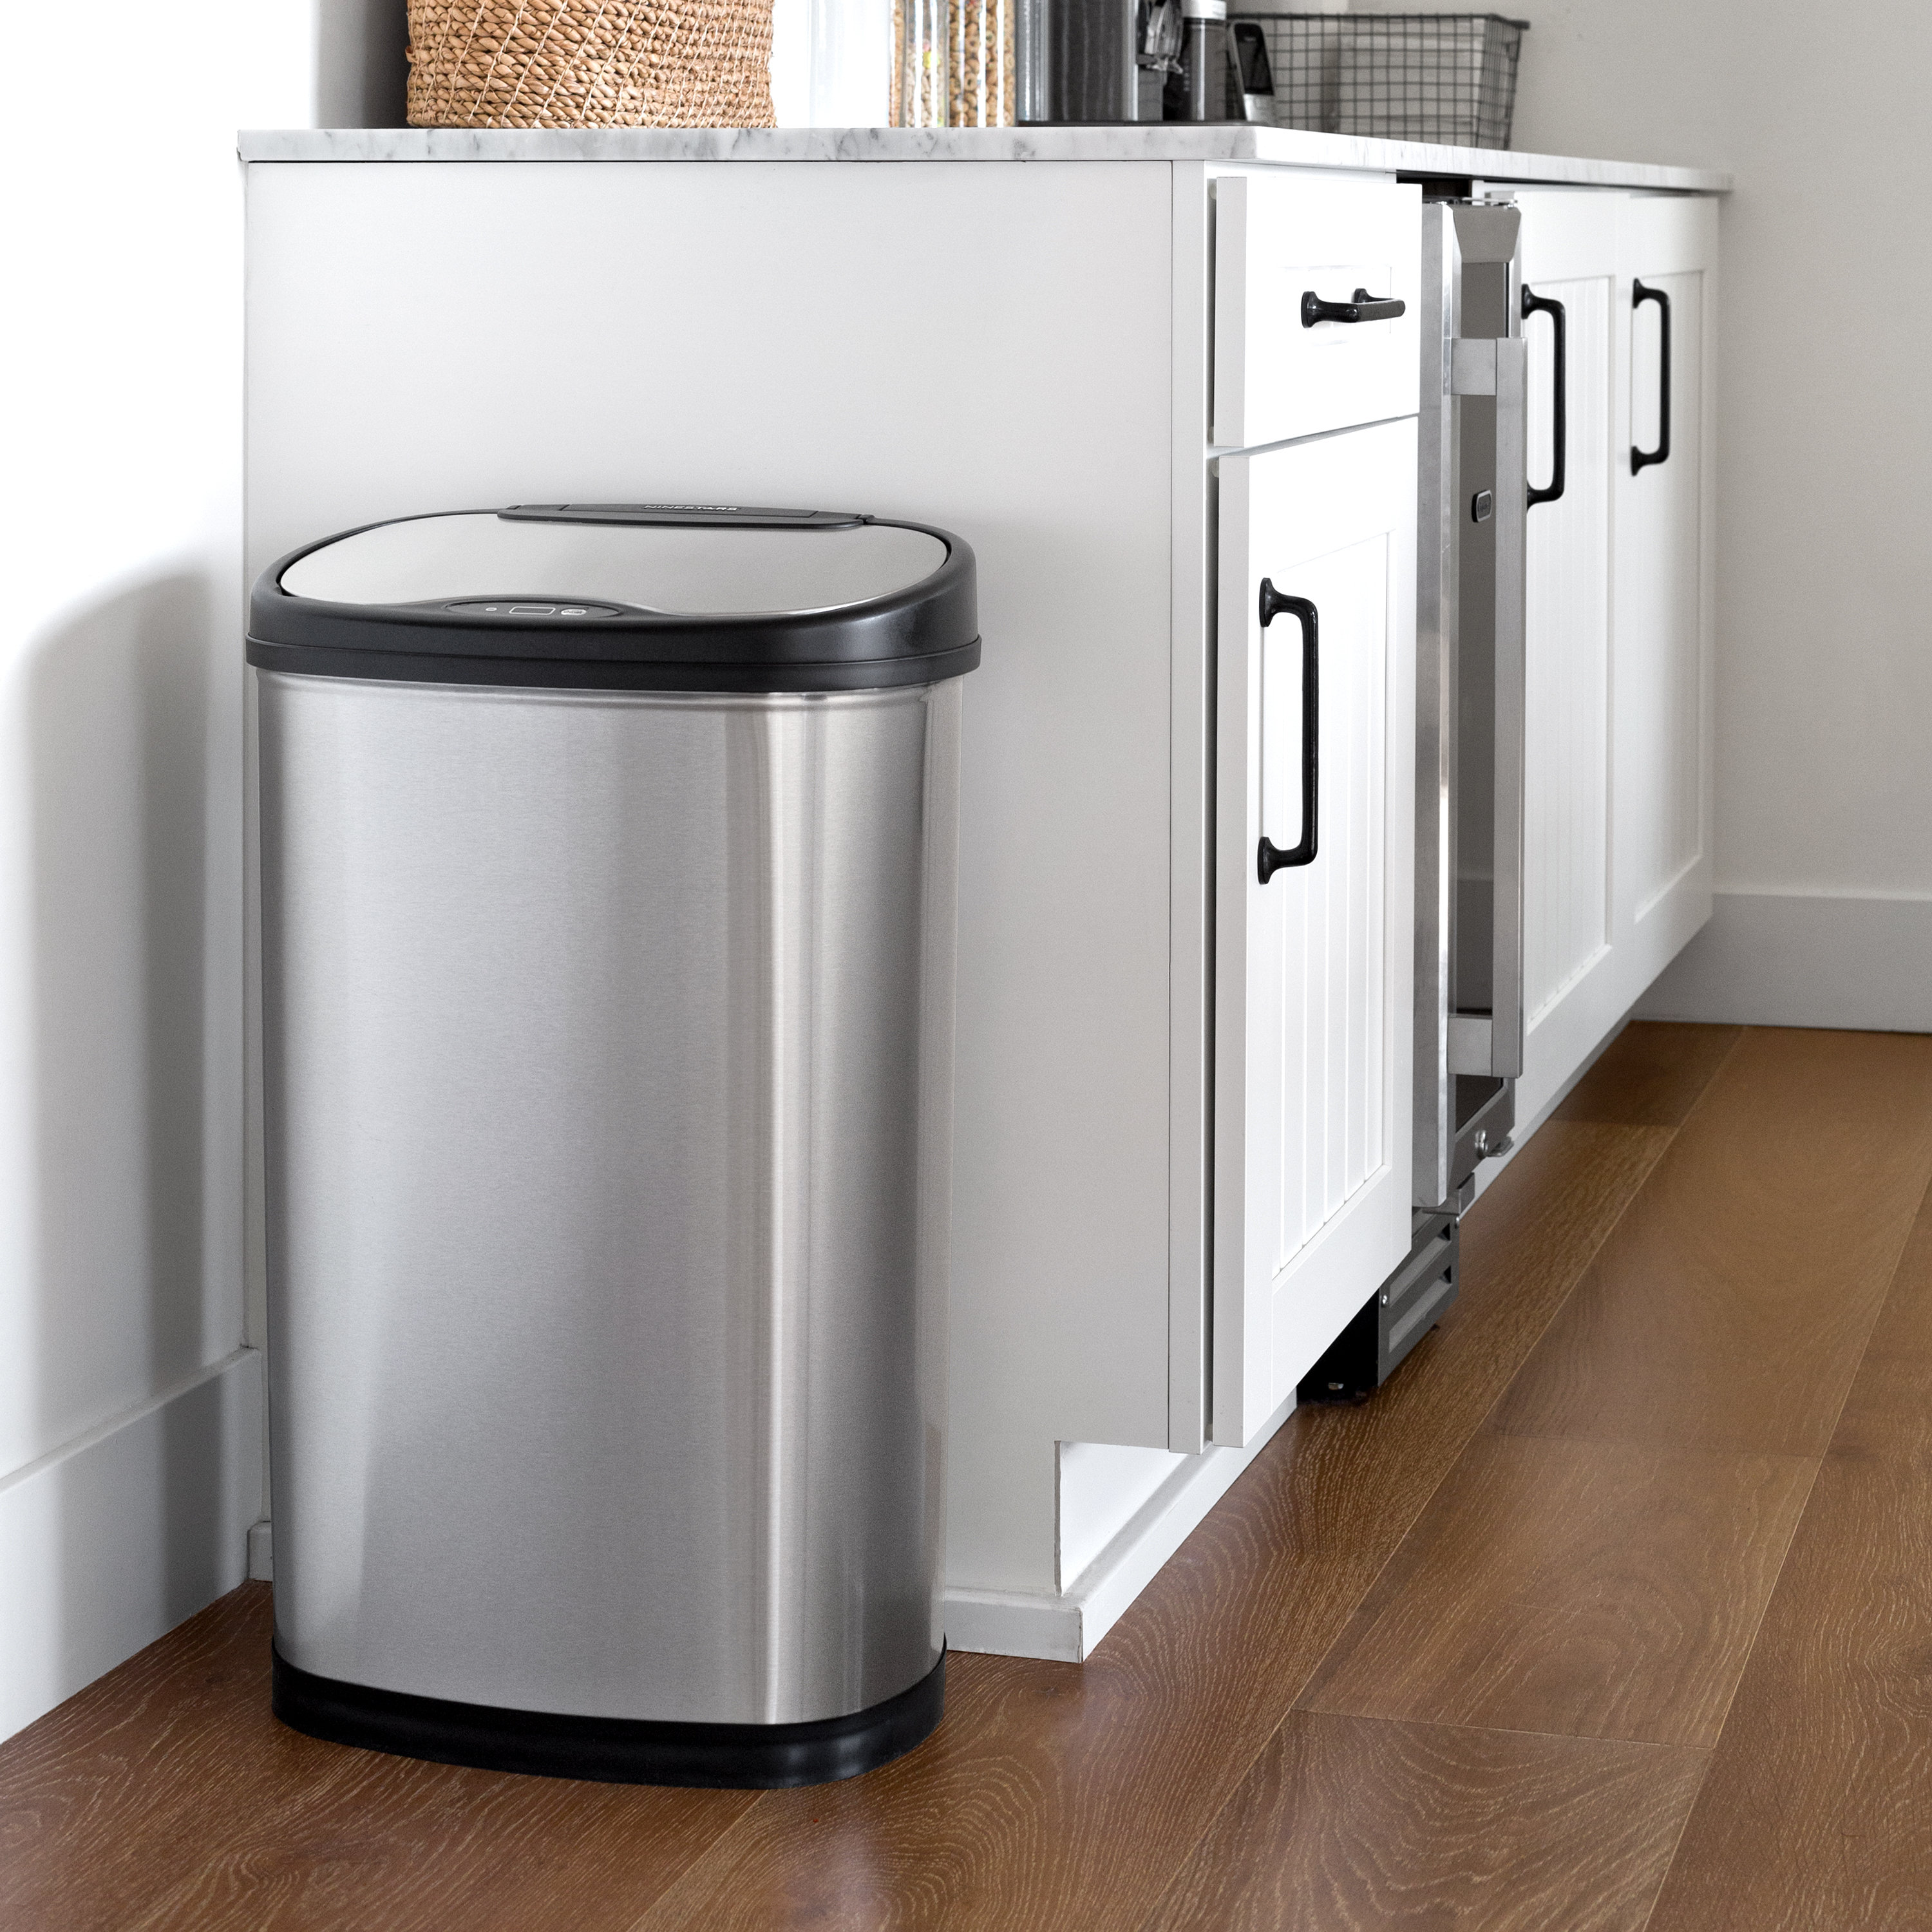 Kitchen Trash Cans For Less 